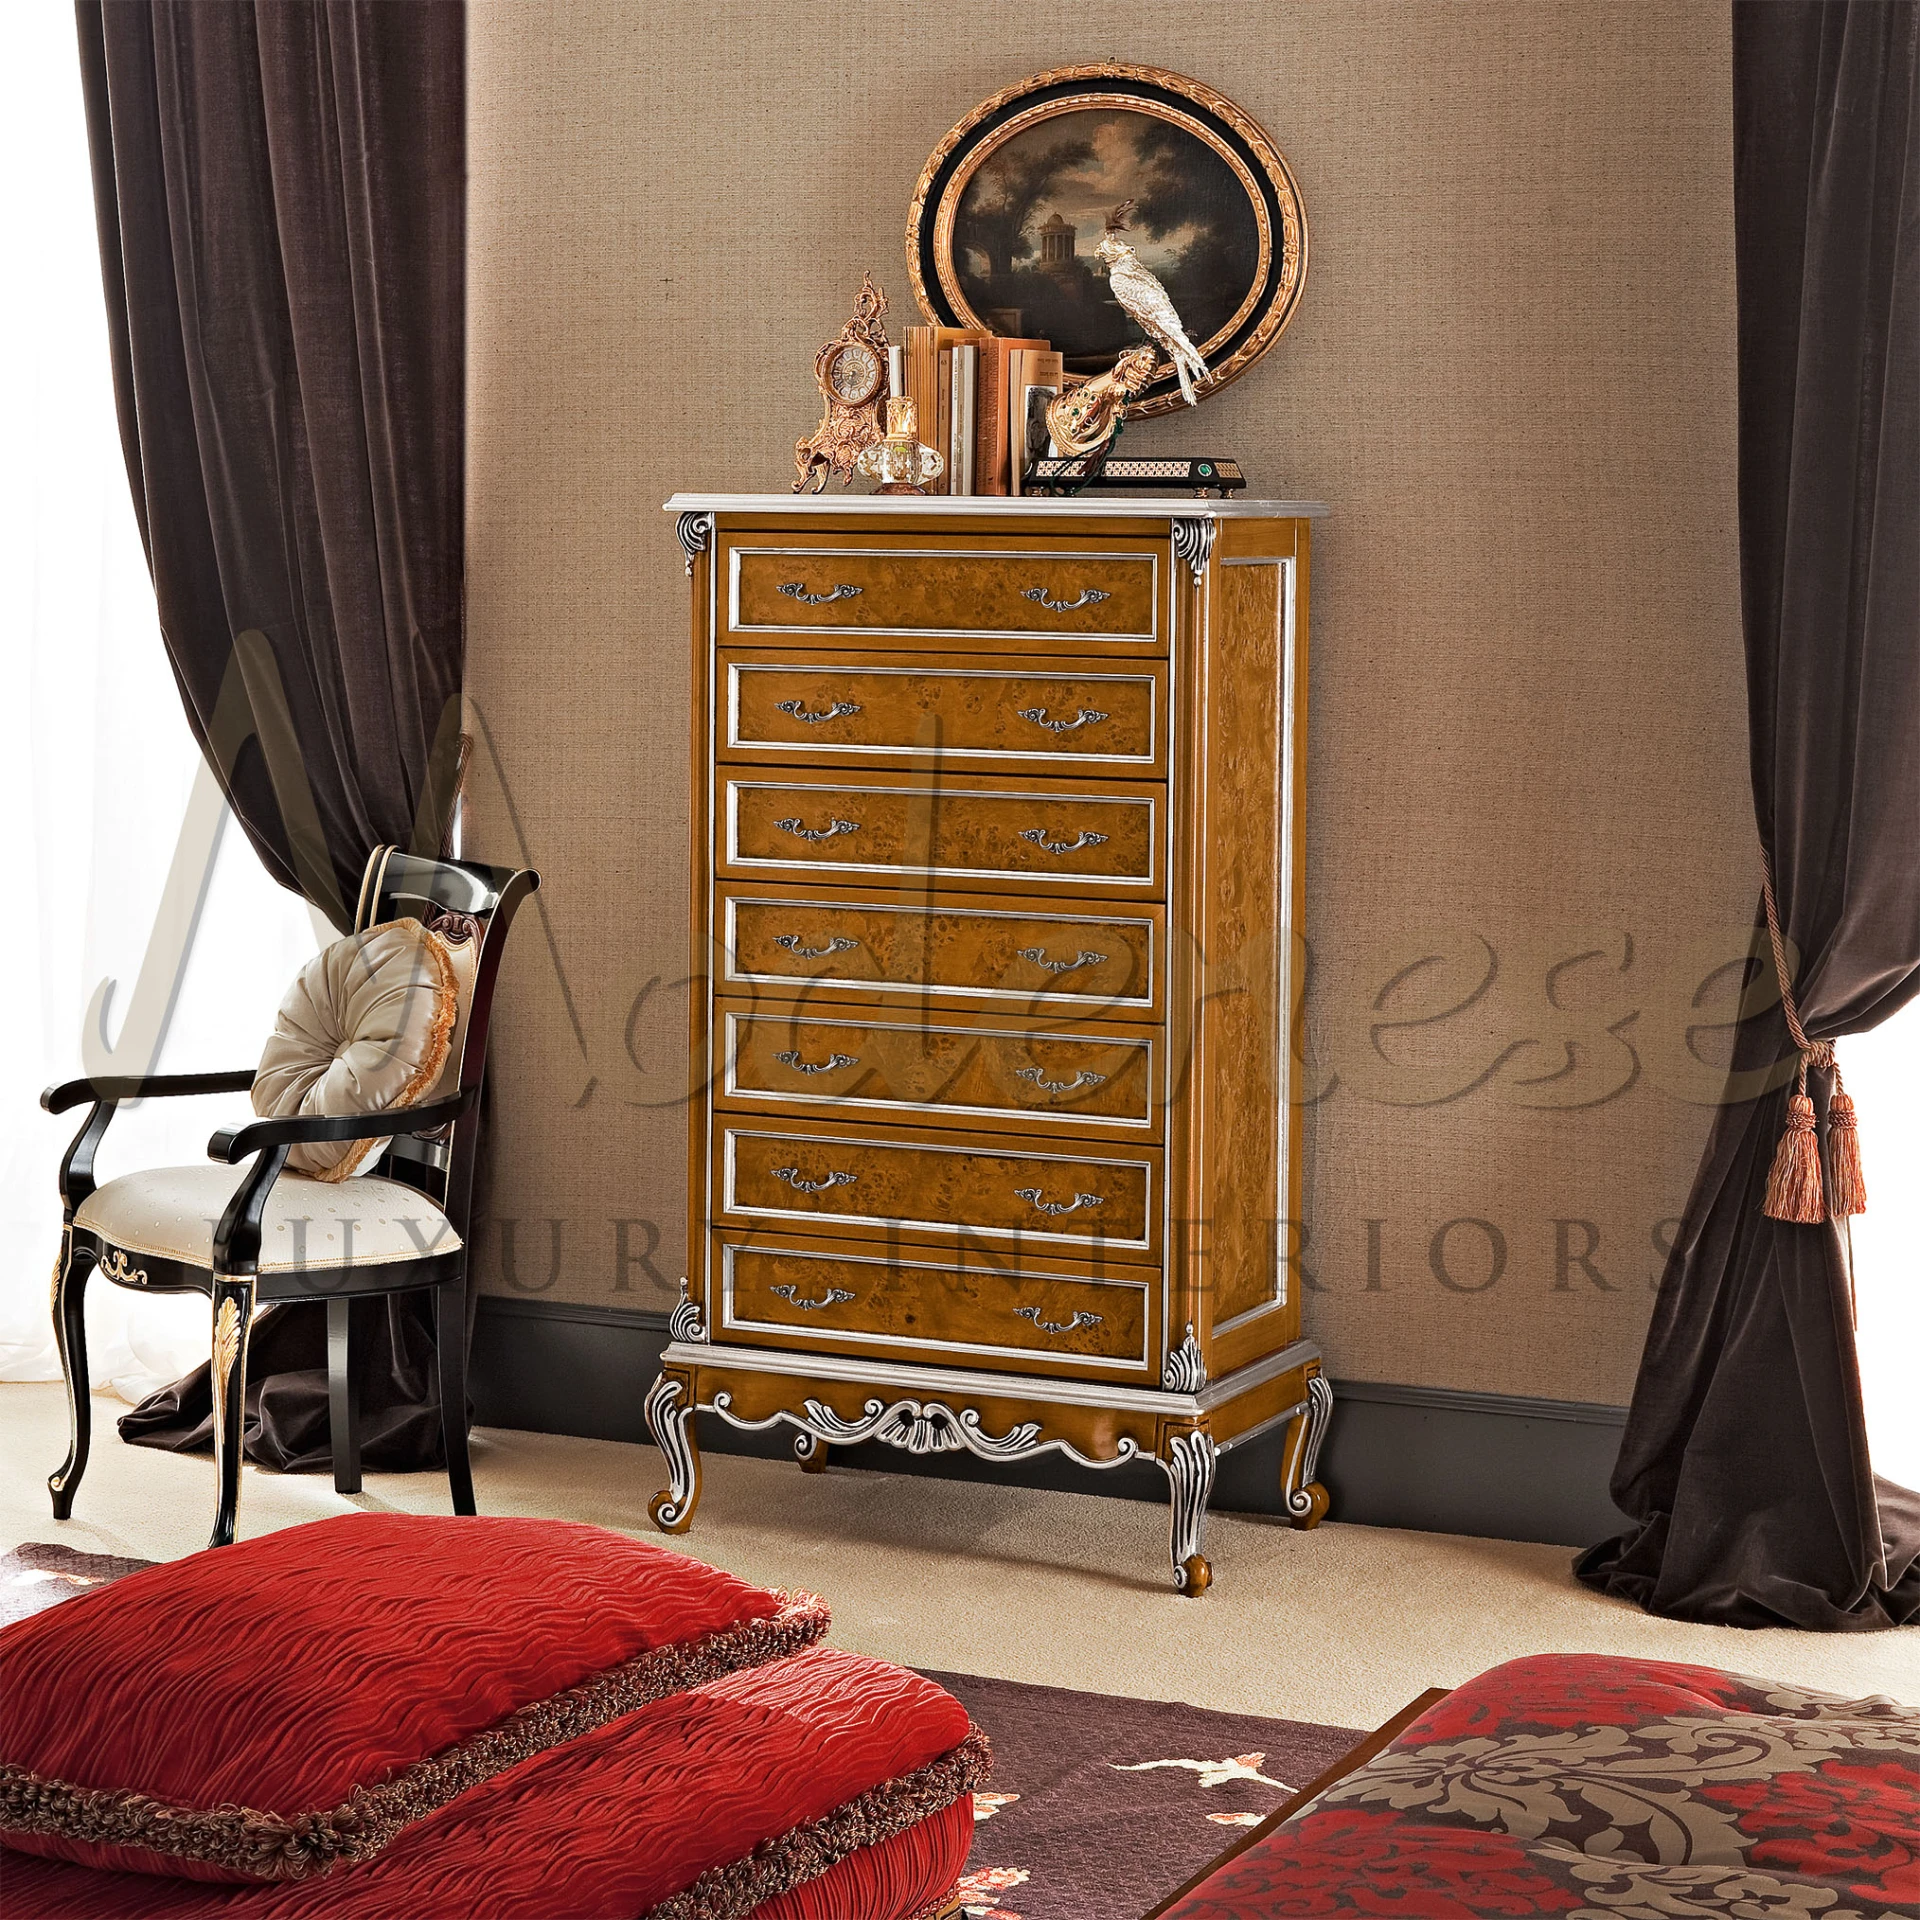 Vintage-style tall dresser with burlwood finish and intricate silver detailing by Modenese Furniture                                                                       